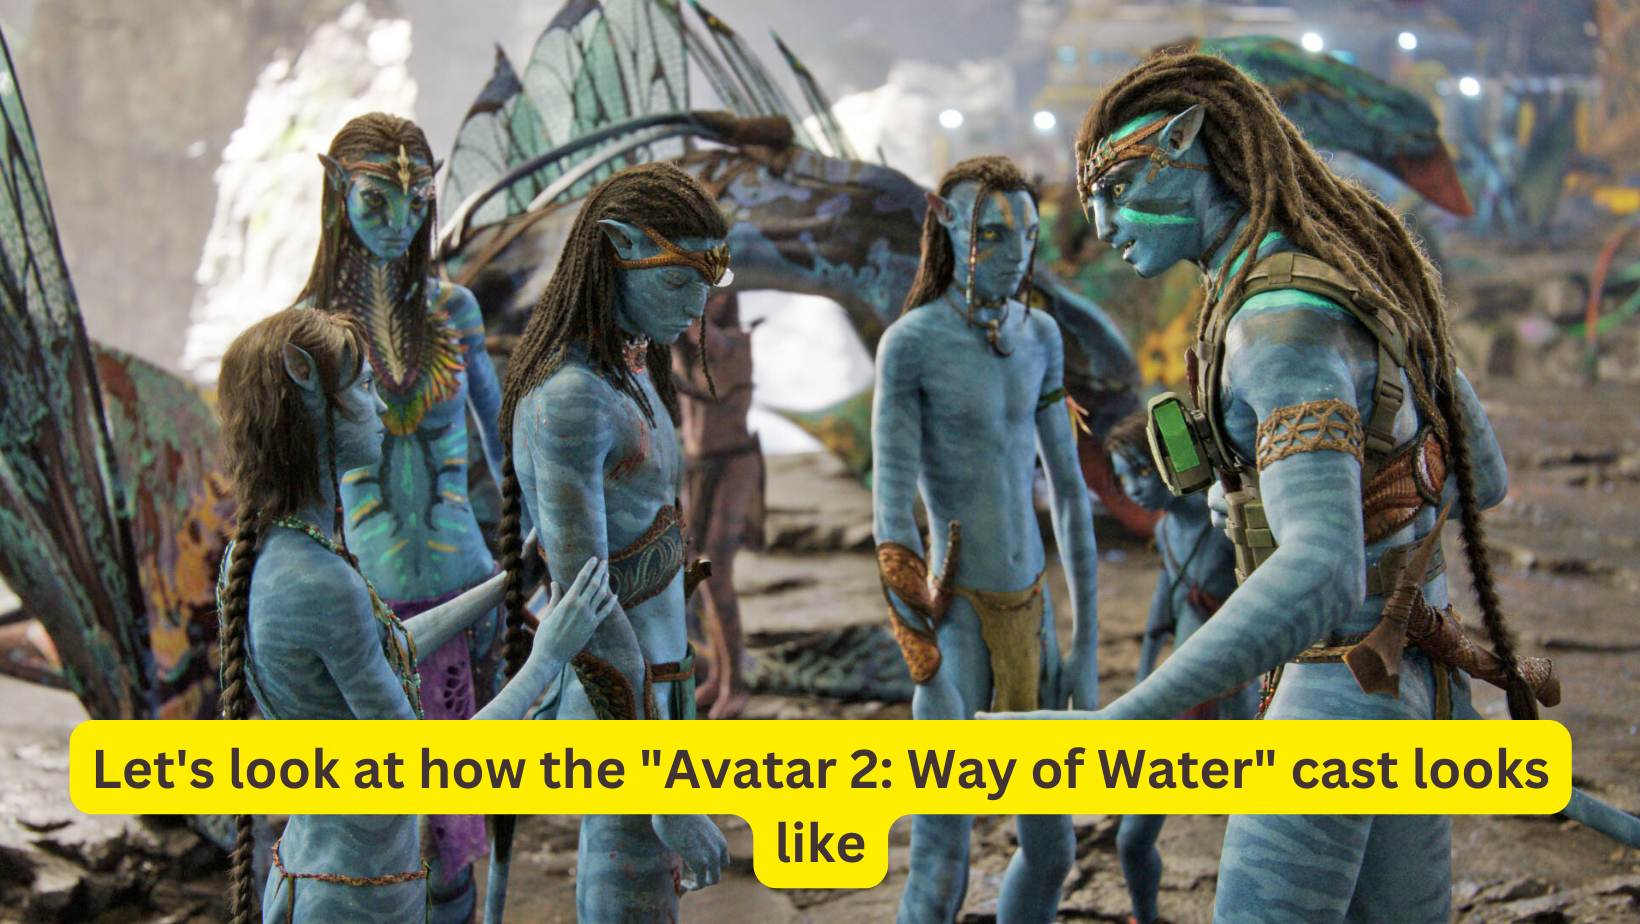 Let's look at how the "Avatar 2: Way of Water" cast looks like